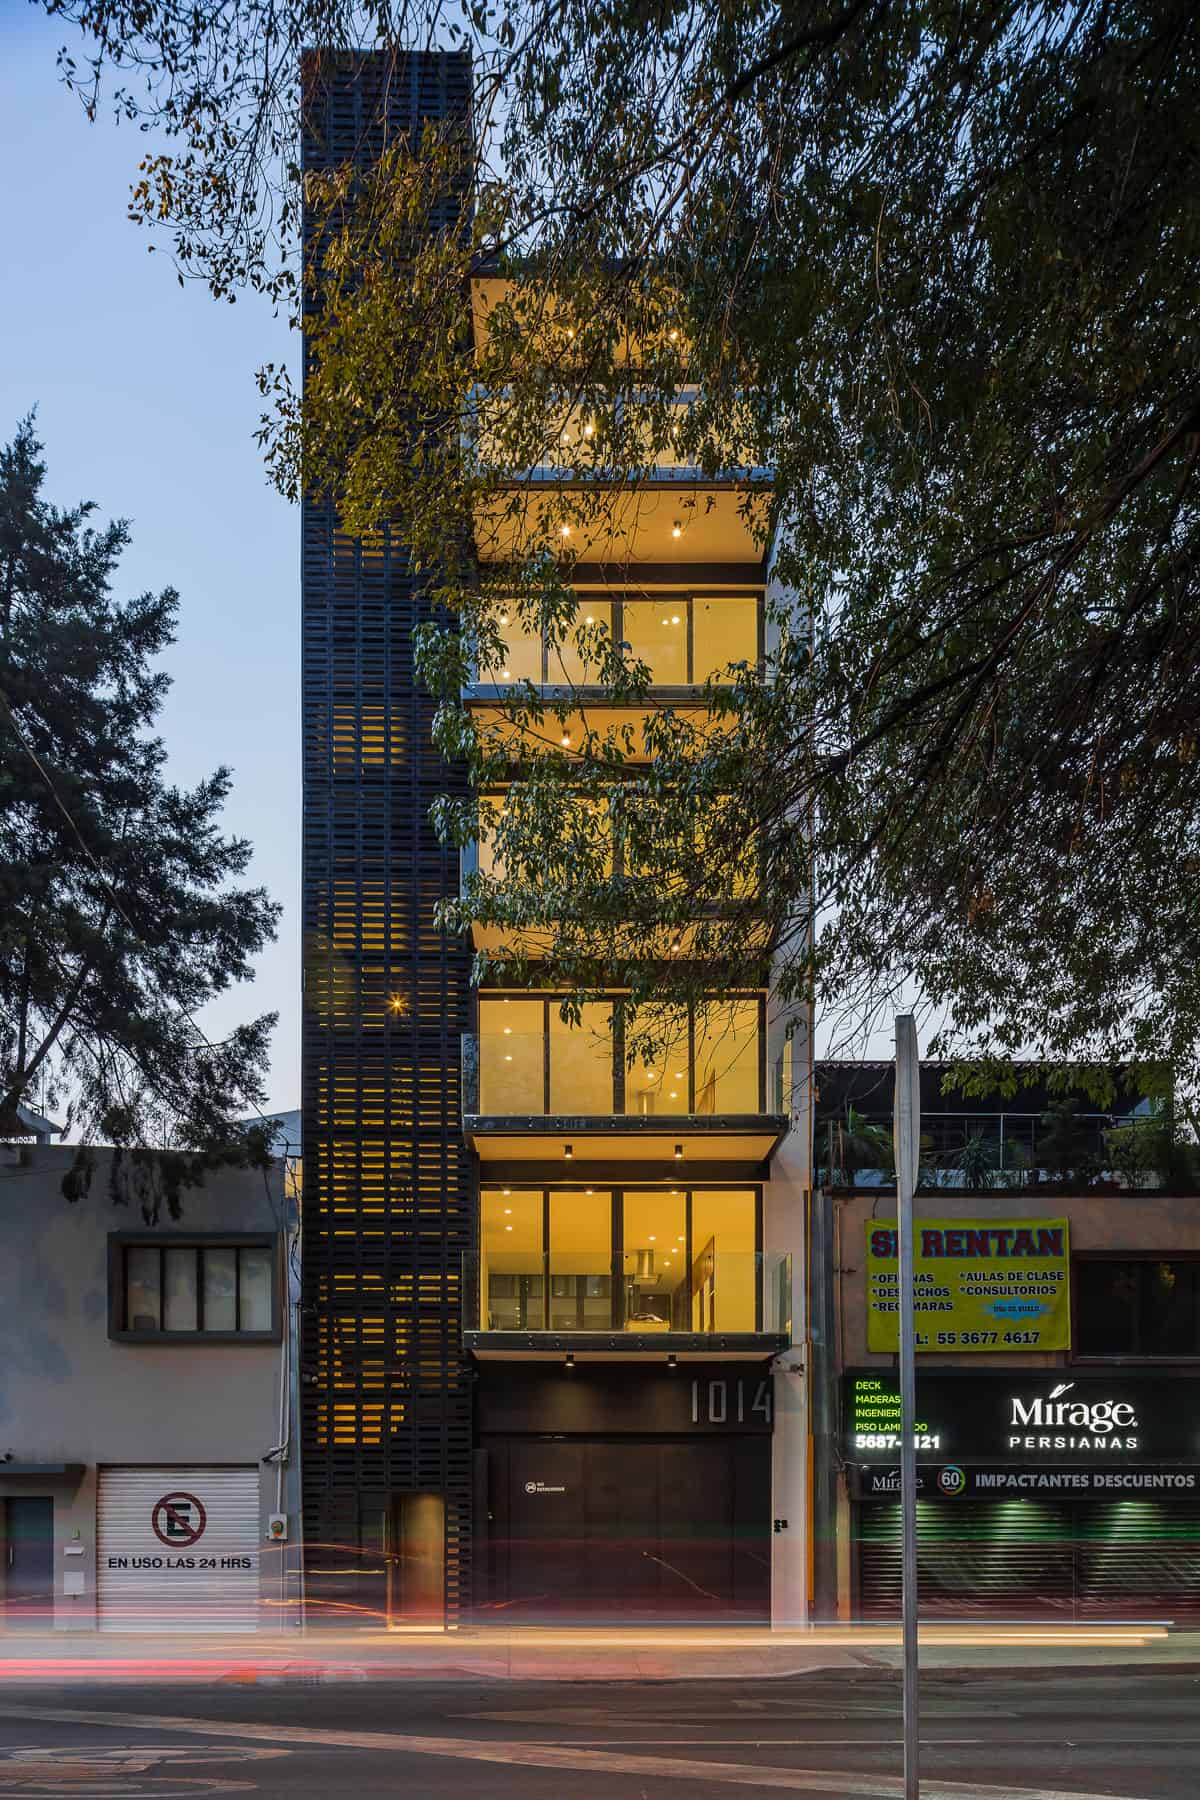 A building seeking for answers to the complex urban development process of Mexico City